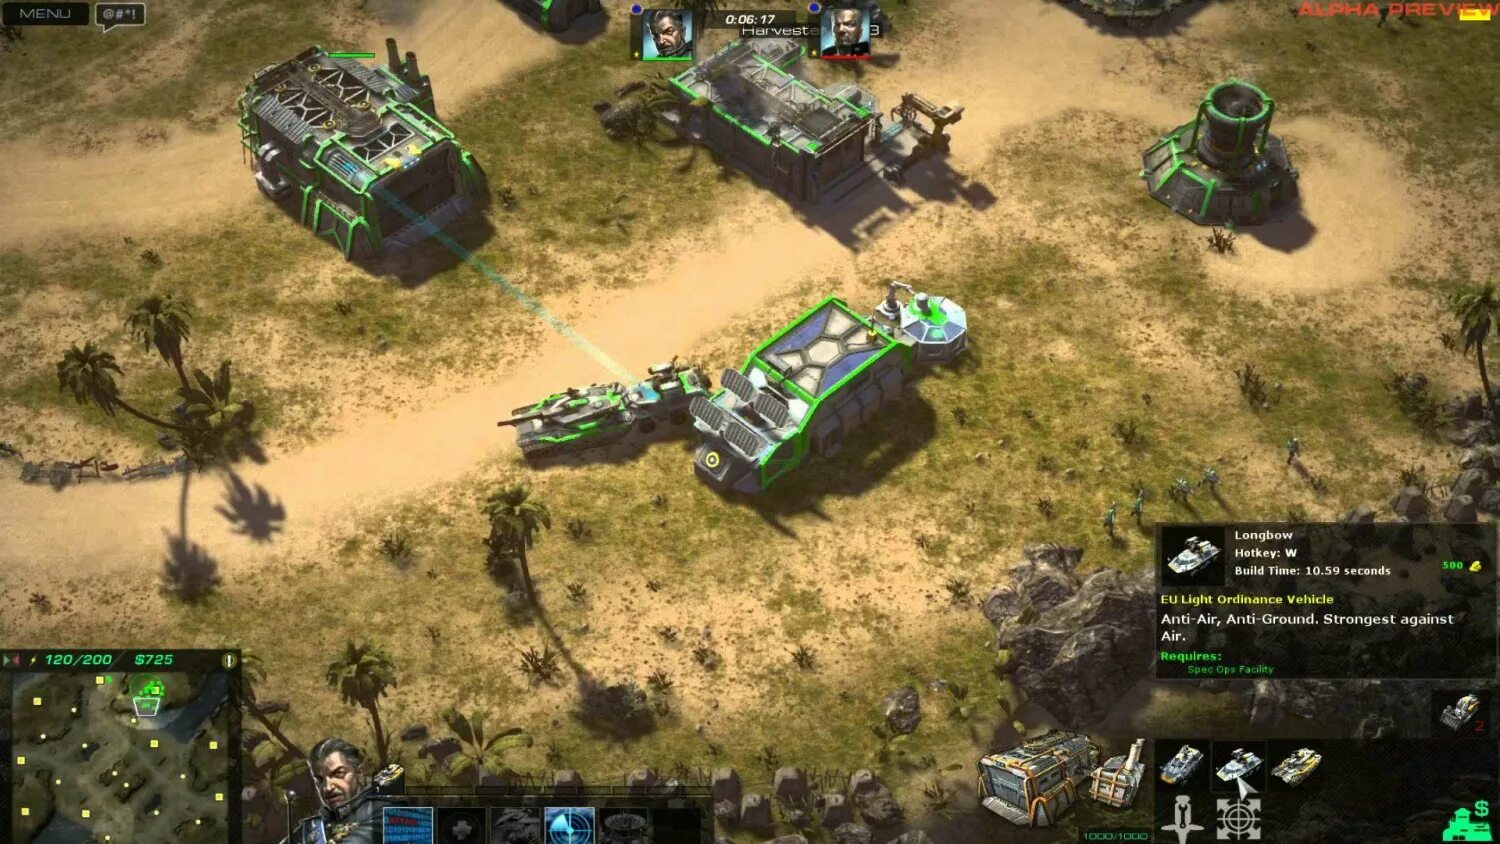 Command Conquer 2 Remastered collection. Generals 2 Gameplay. Command & Conquer Remastered collection. Command and Conquer 2019.